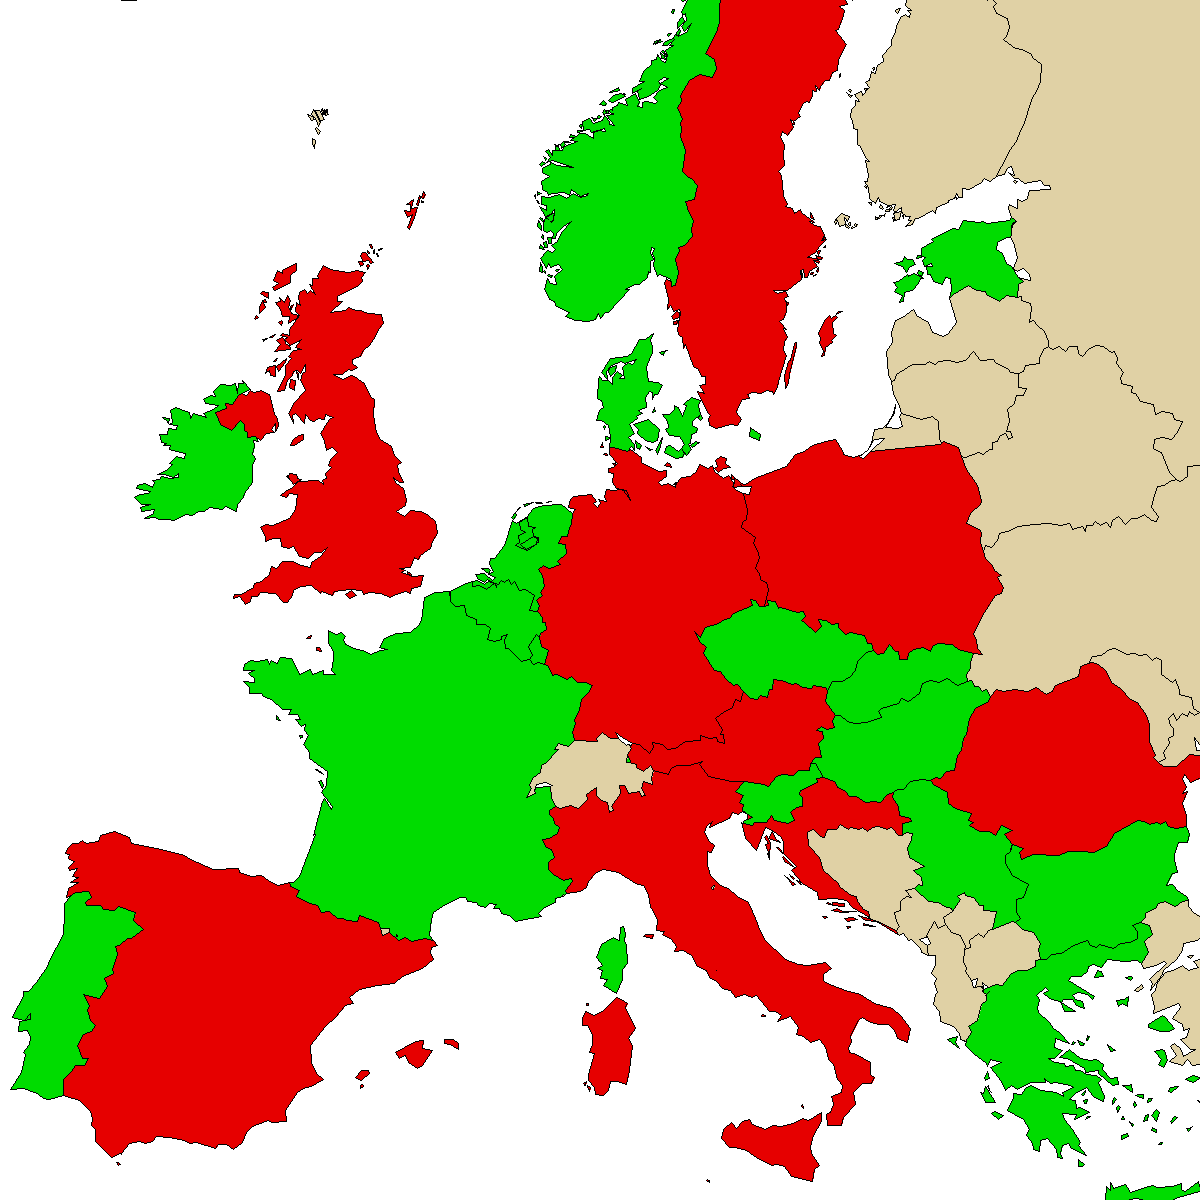 legal info map for our product 2FPM, green are countries where we found no ban, red with ban, grey is unknown